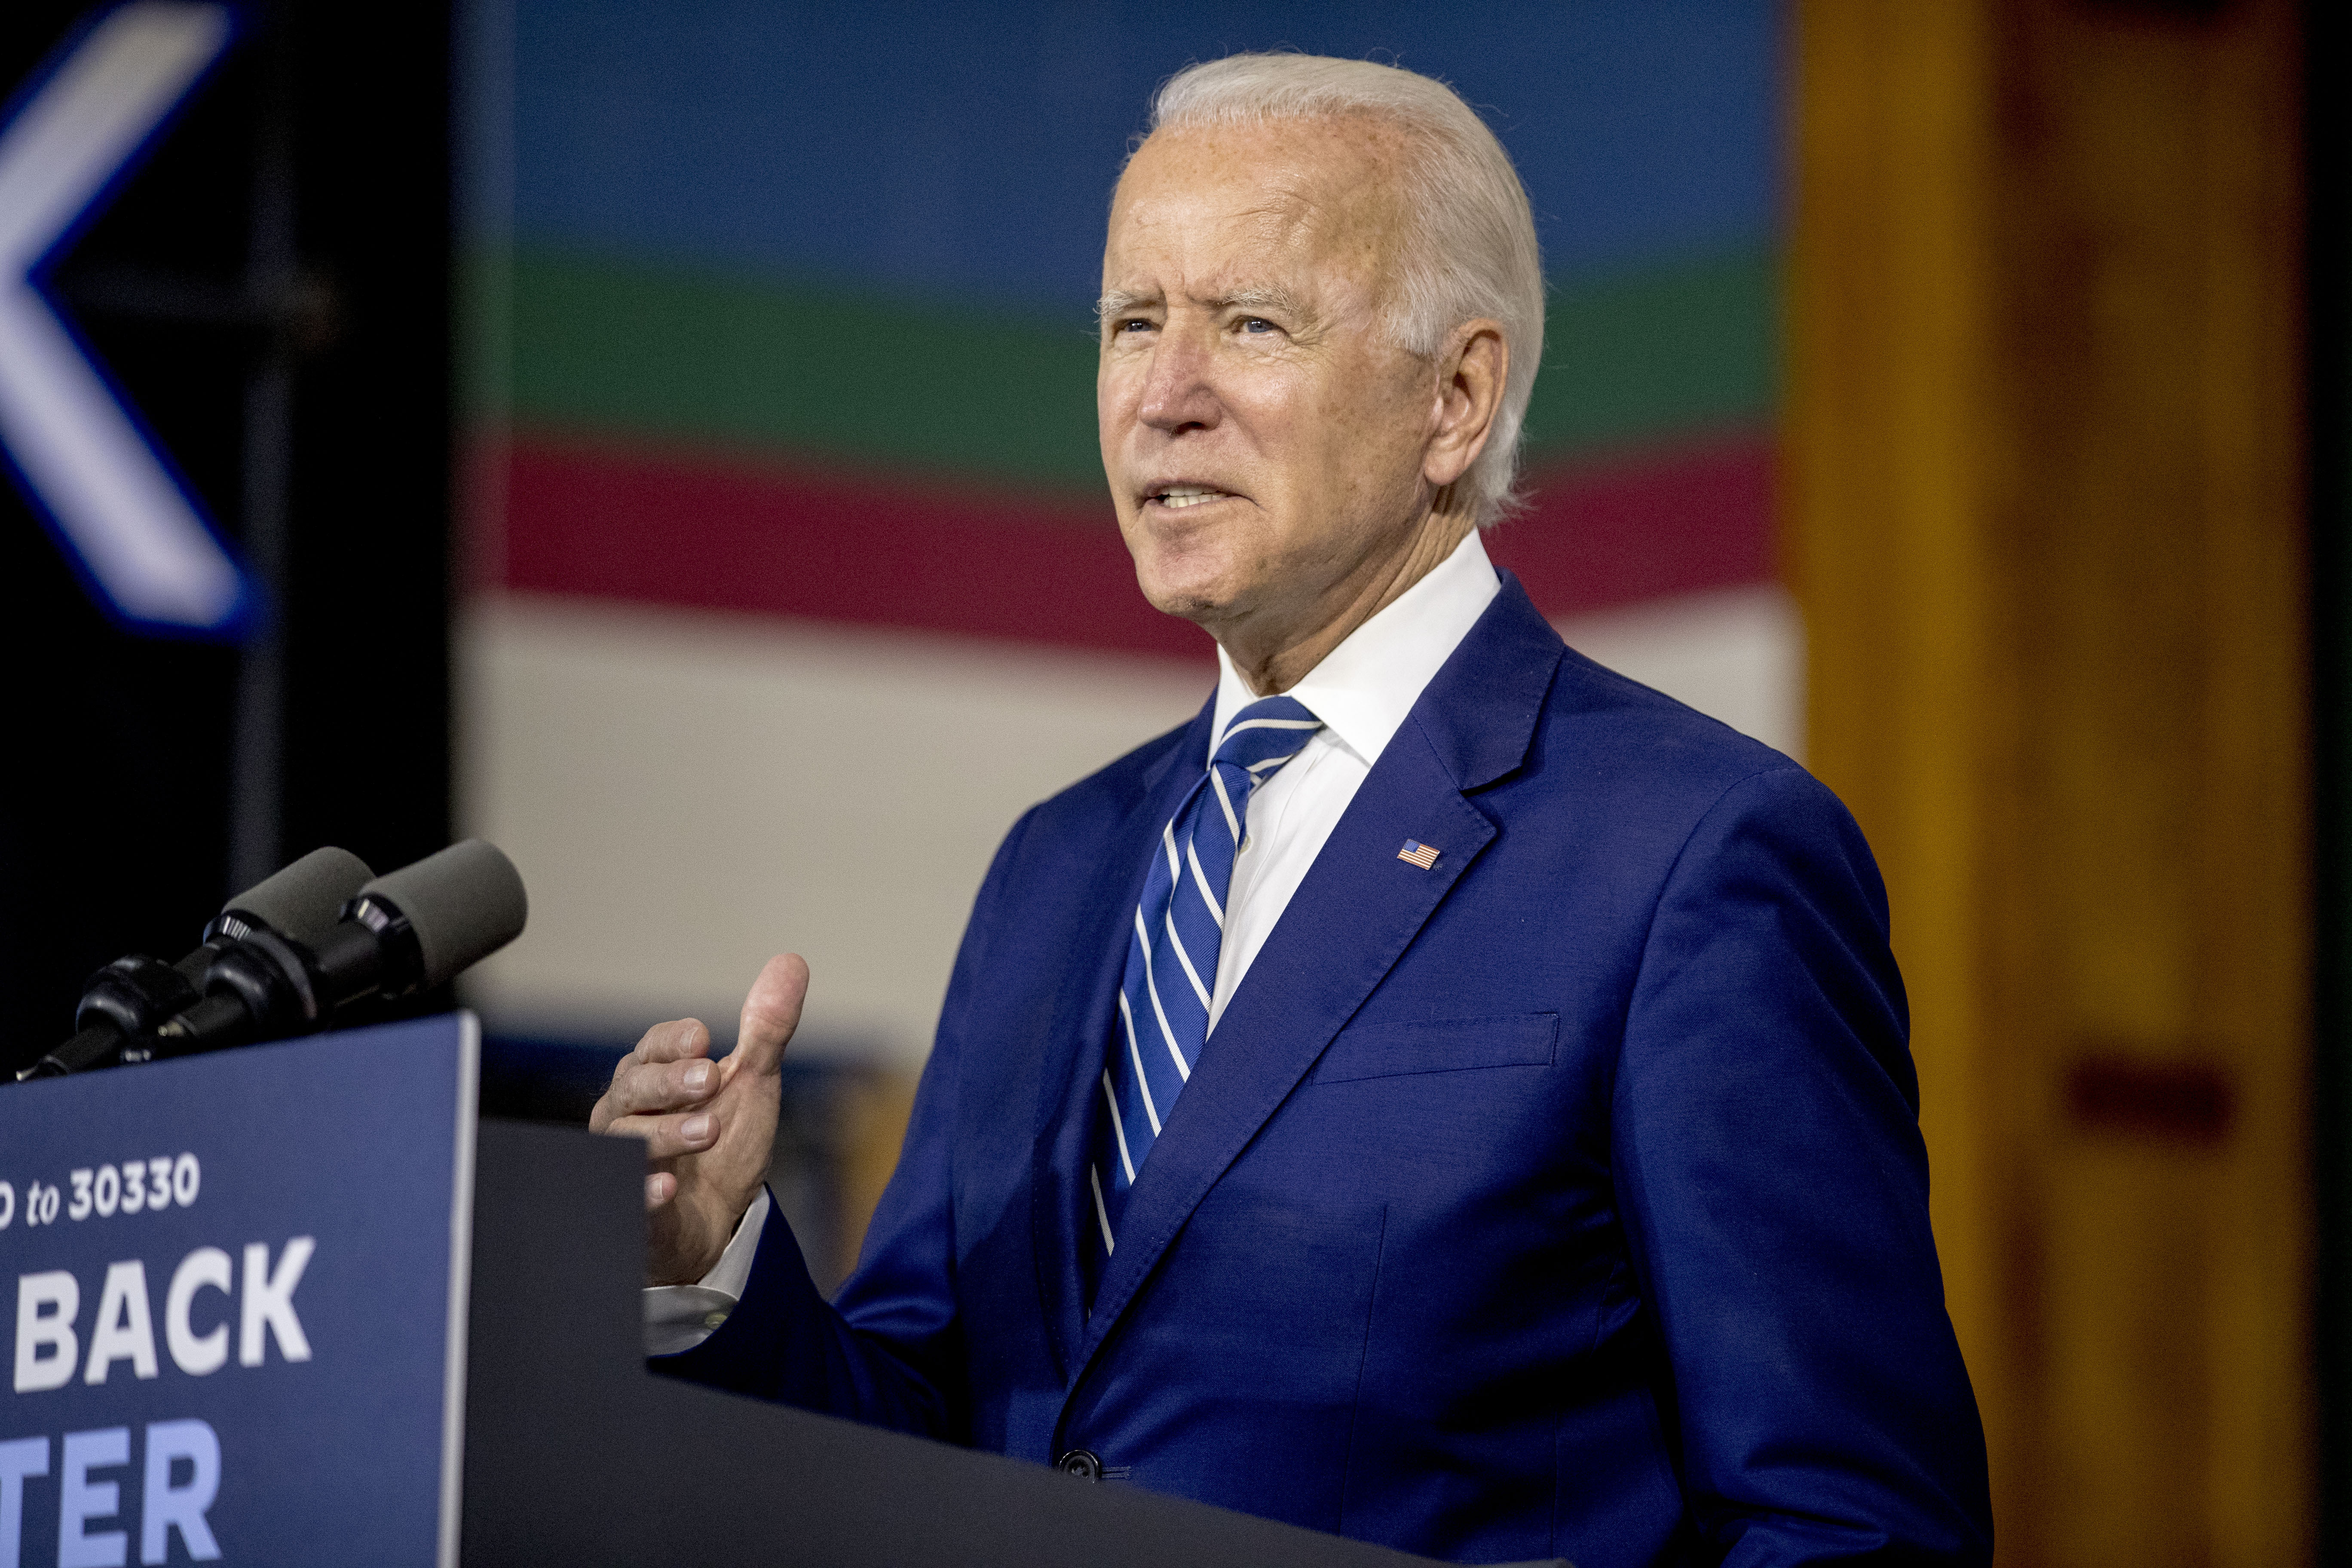 Democratic presidential candidate former Vice President Joe Biden speaks at a campaign event at the Colonial Early Education Program at the Colwyck Training Center, Tuesday, July 21, 2020 in New Castle, Del. Photo: AP